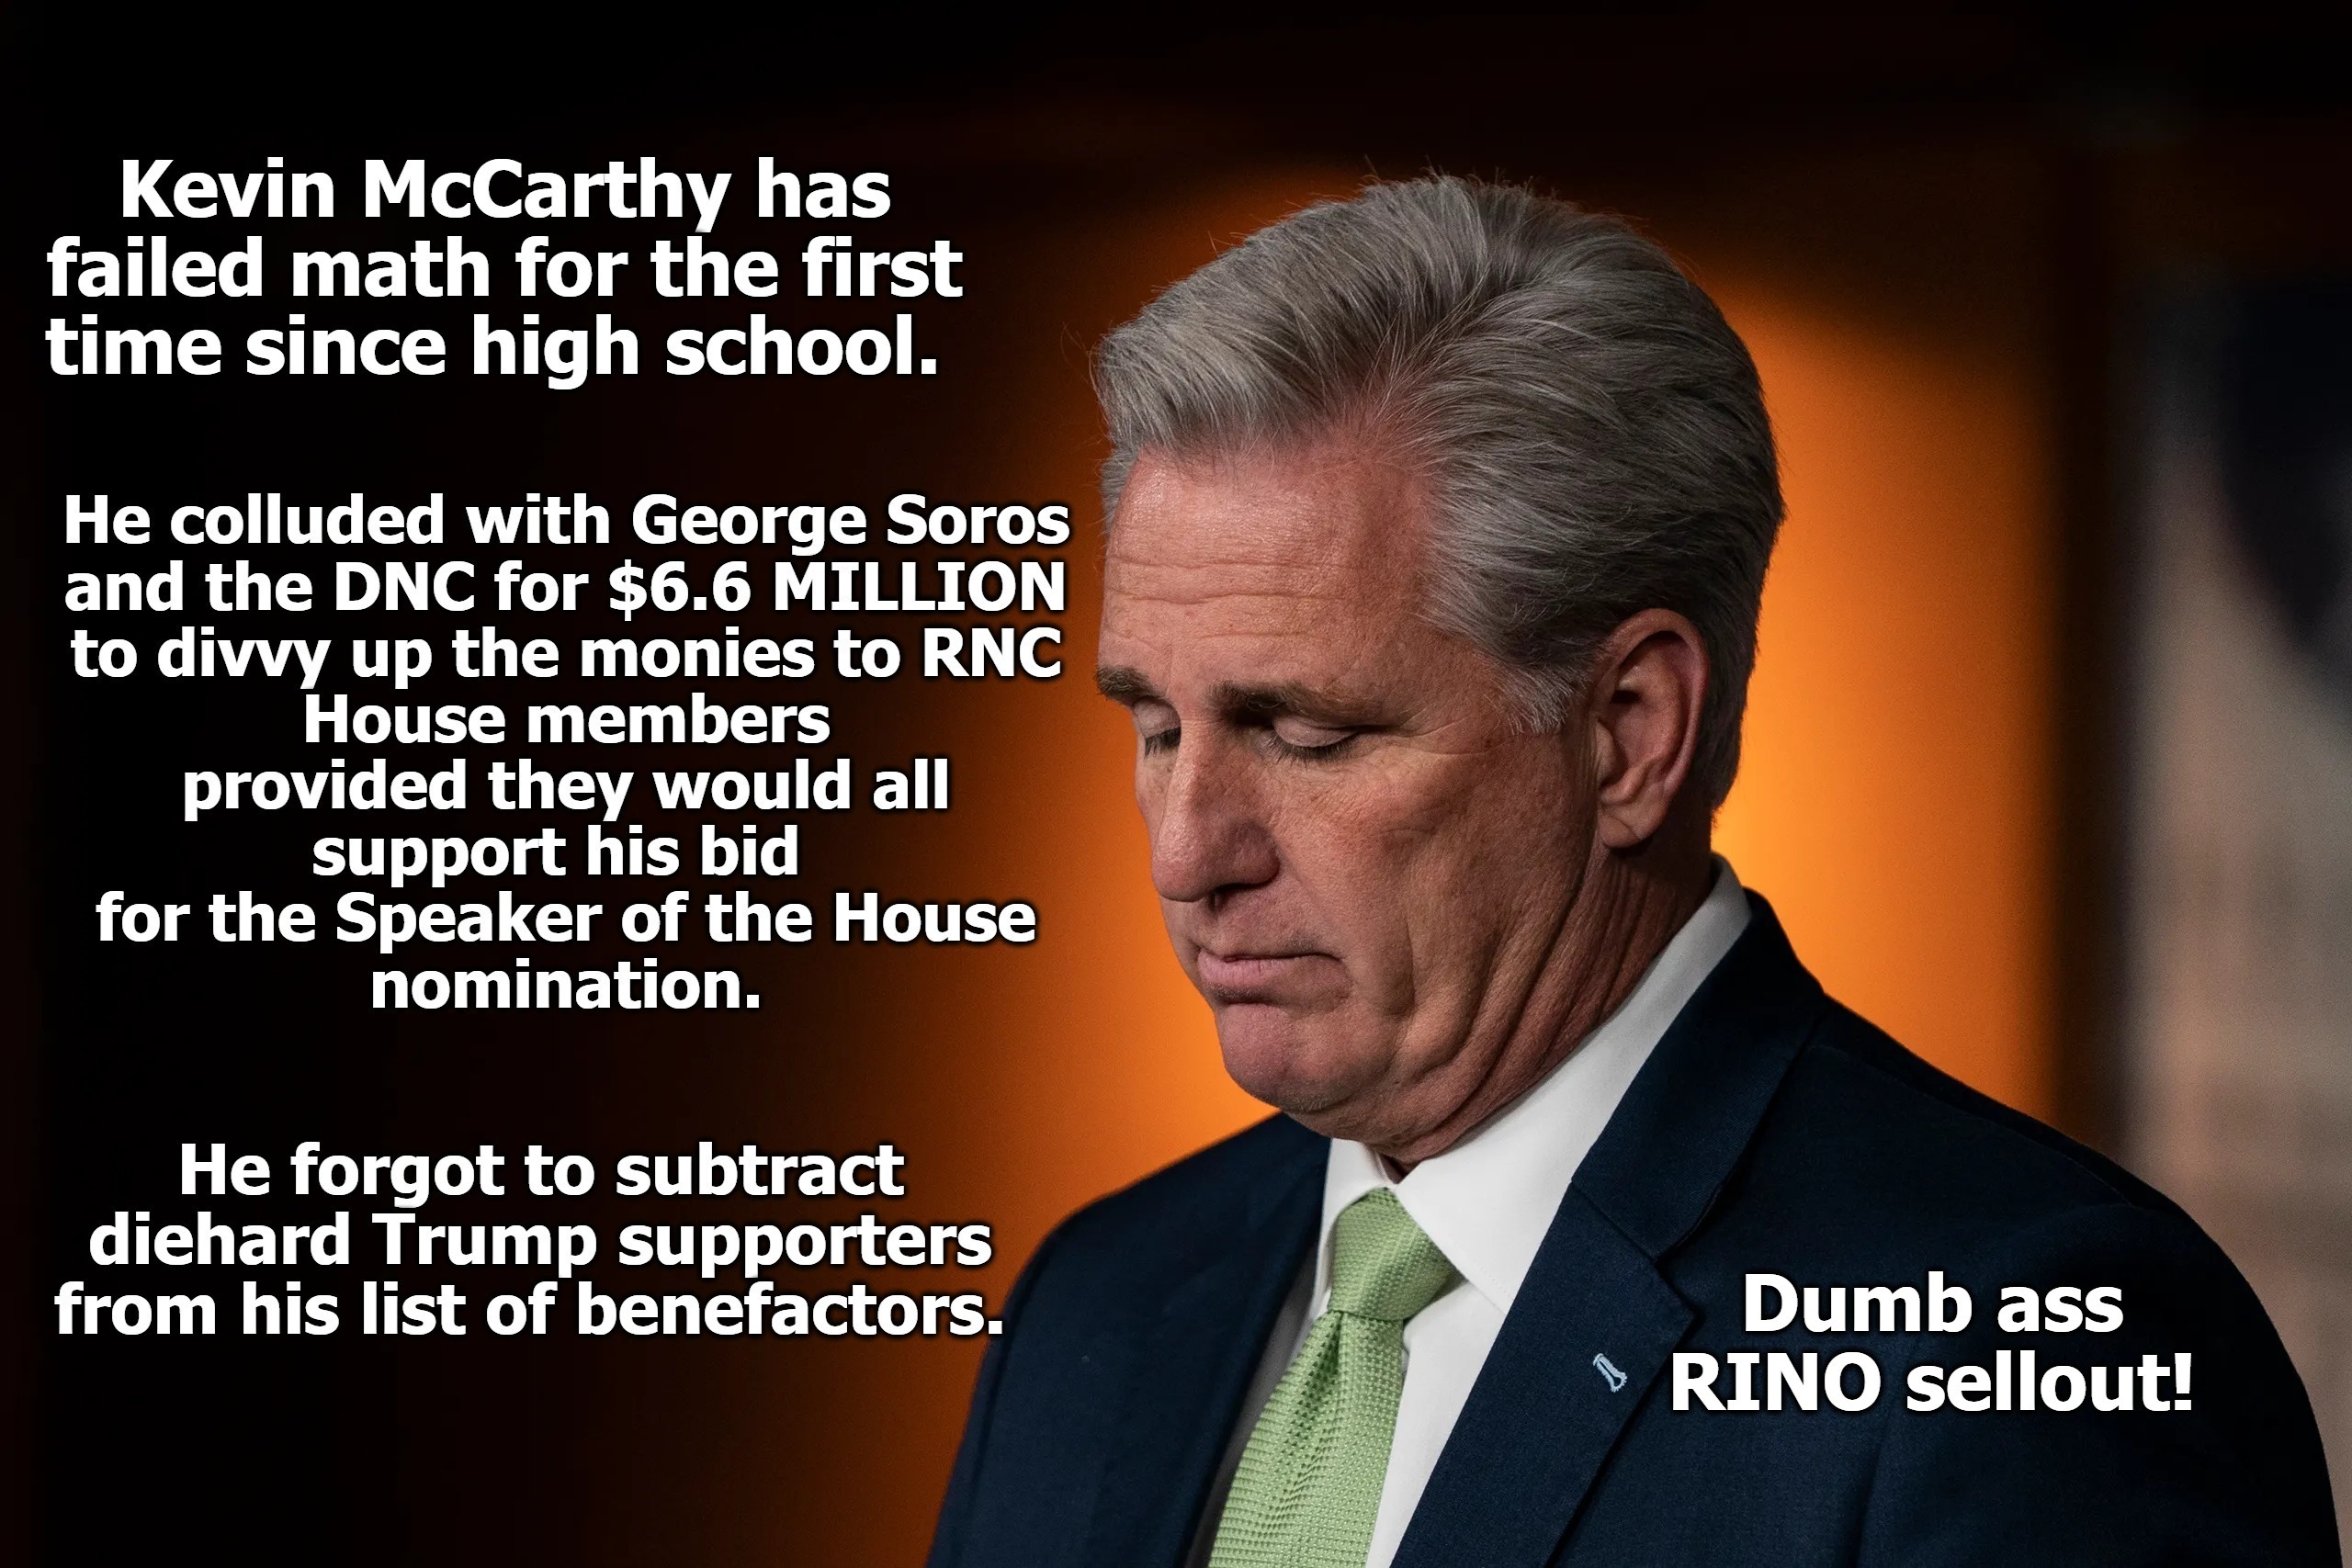 Contemplating Suicide Guy? | image tagged in kevin mccarthy,rino,sellout,collusion,government corruption,george soros | made w/ Imgflip meme maker